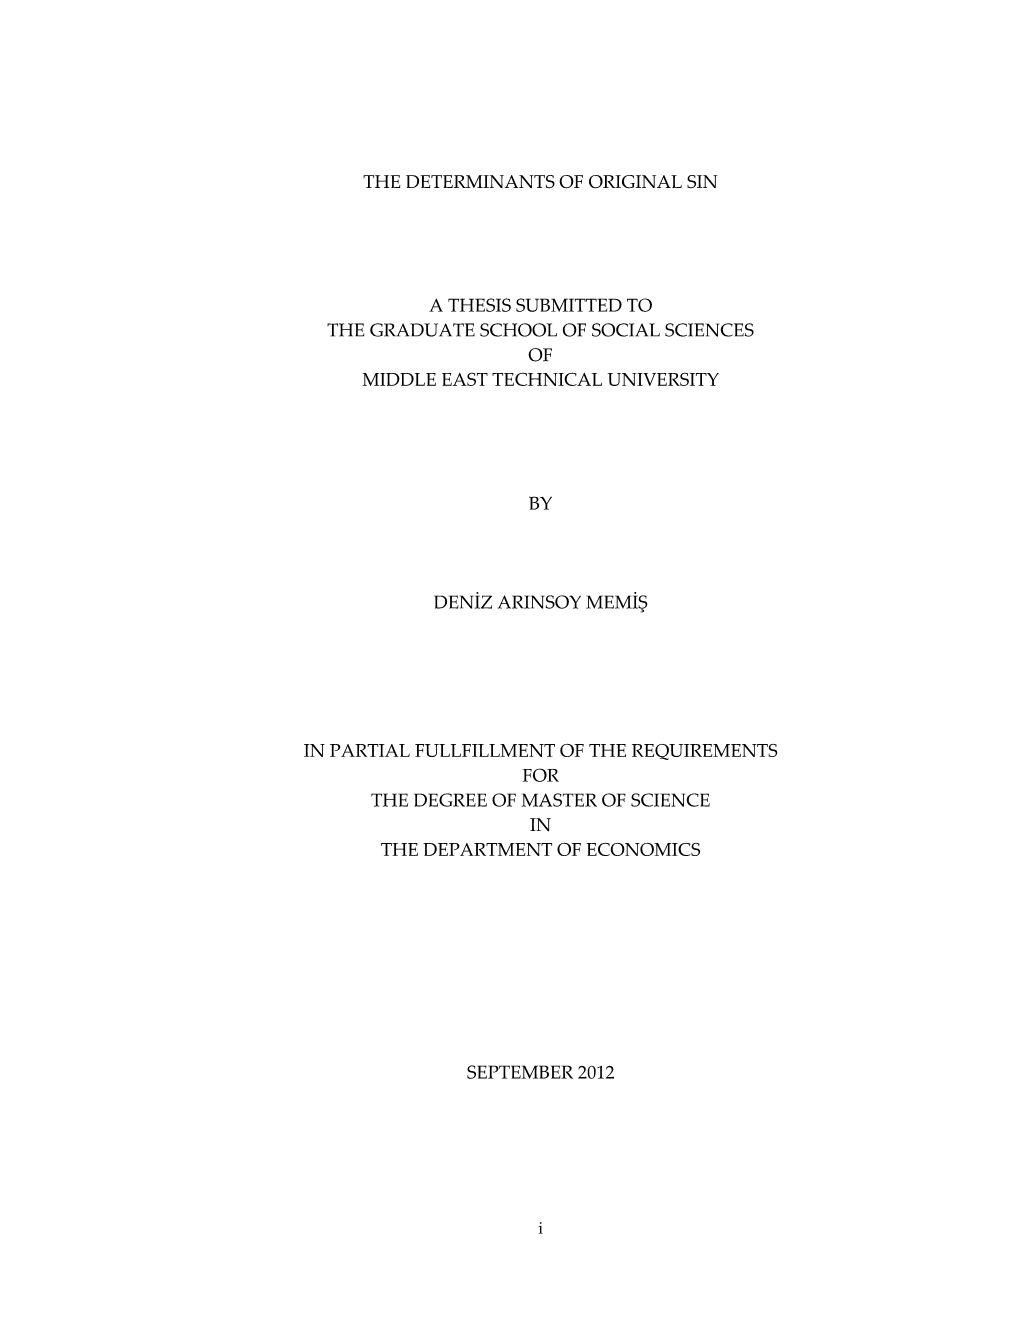 The Determinants of Original Sin a Thesis Submitted to The